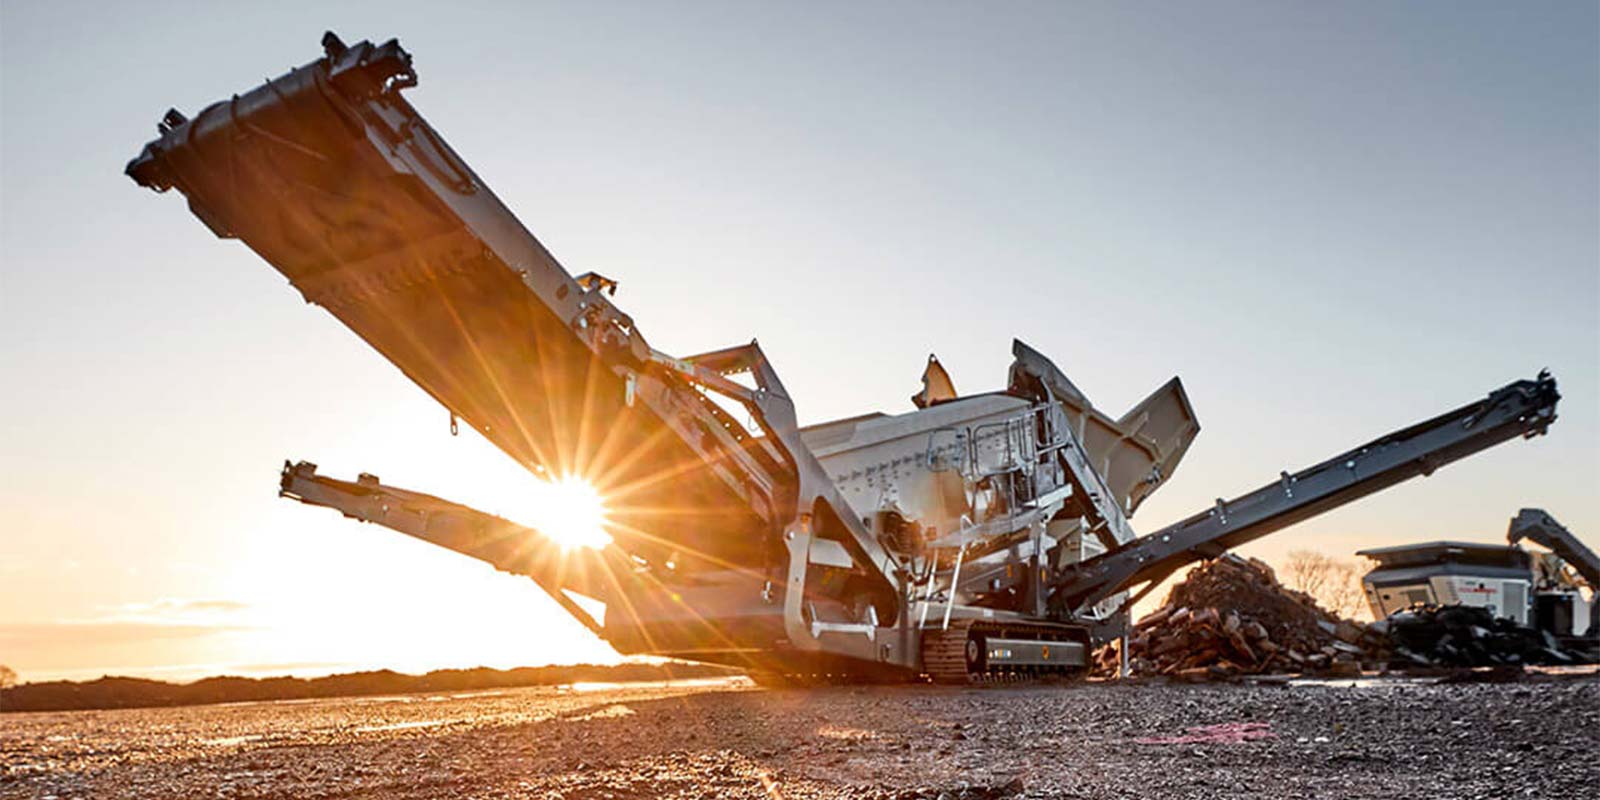 rock crusher on a site during sunset